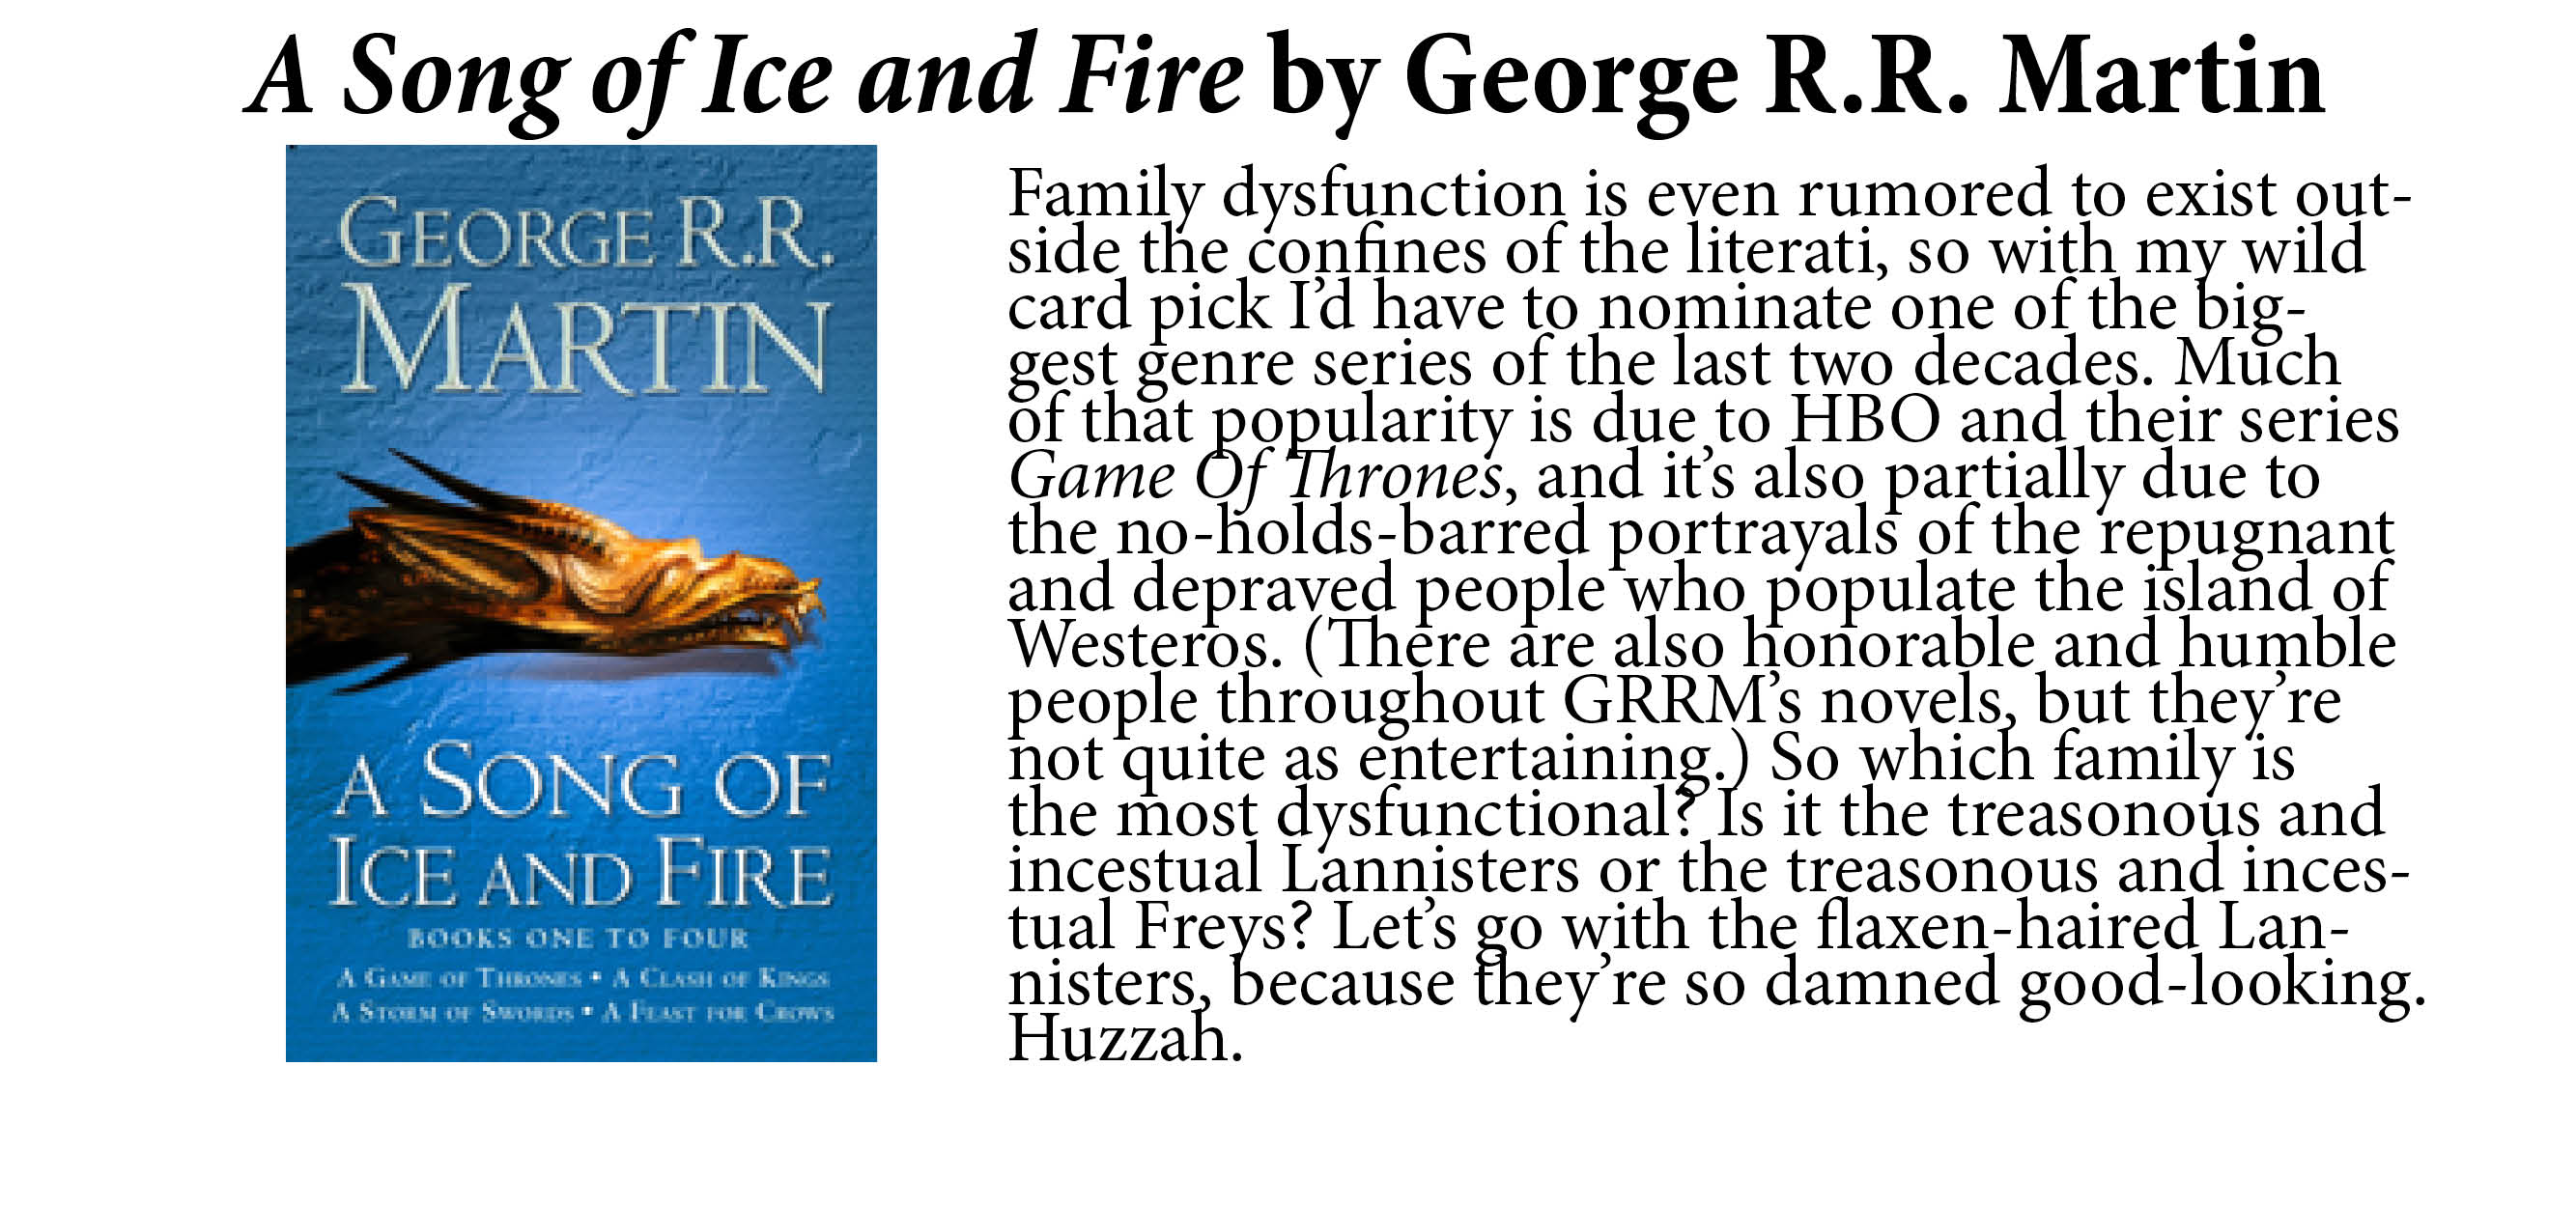 A Song of Ice and Fire by George RR Martin